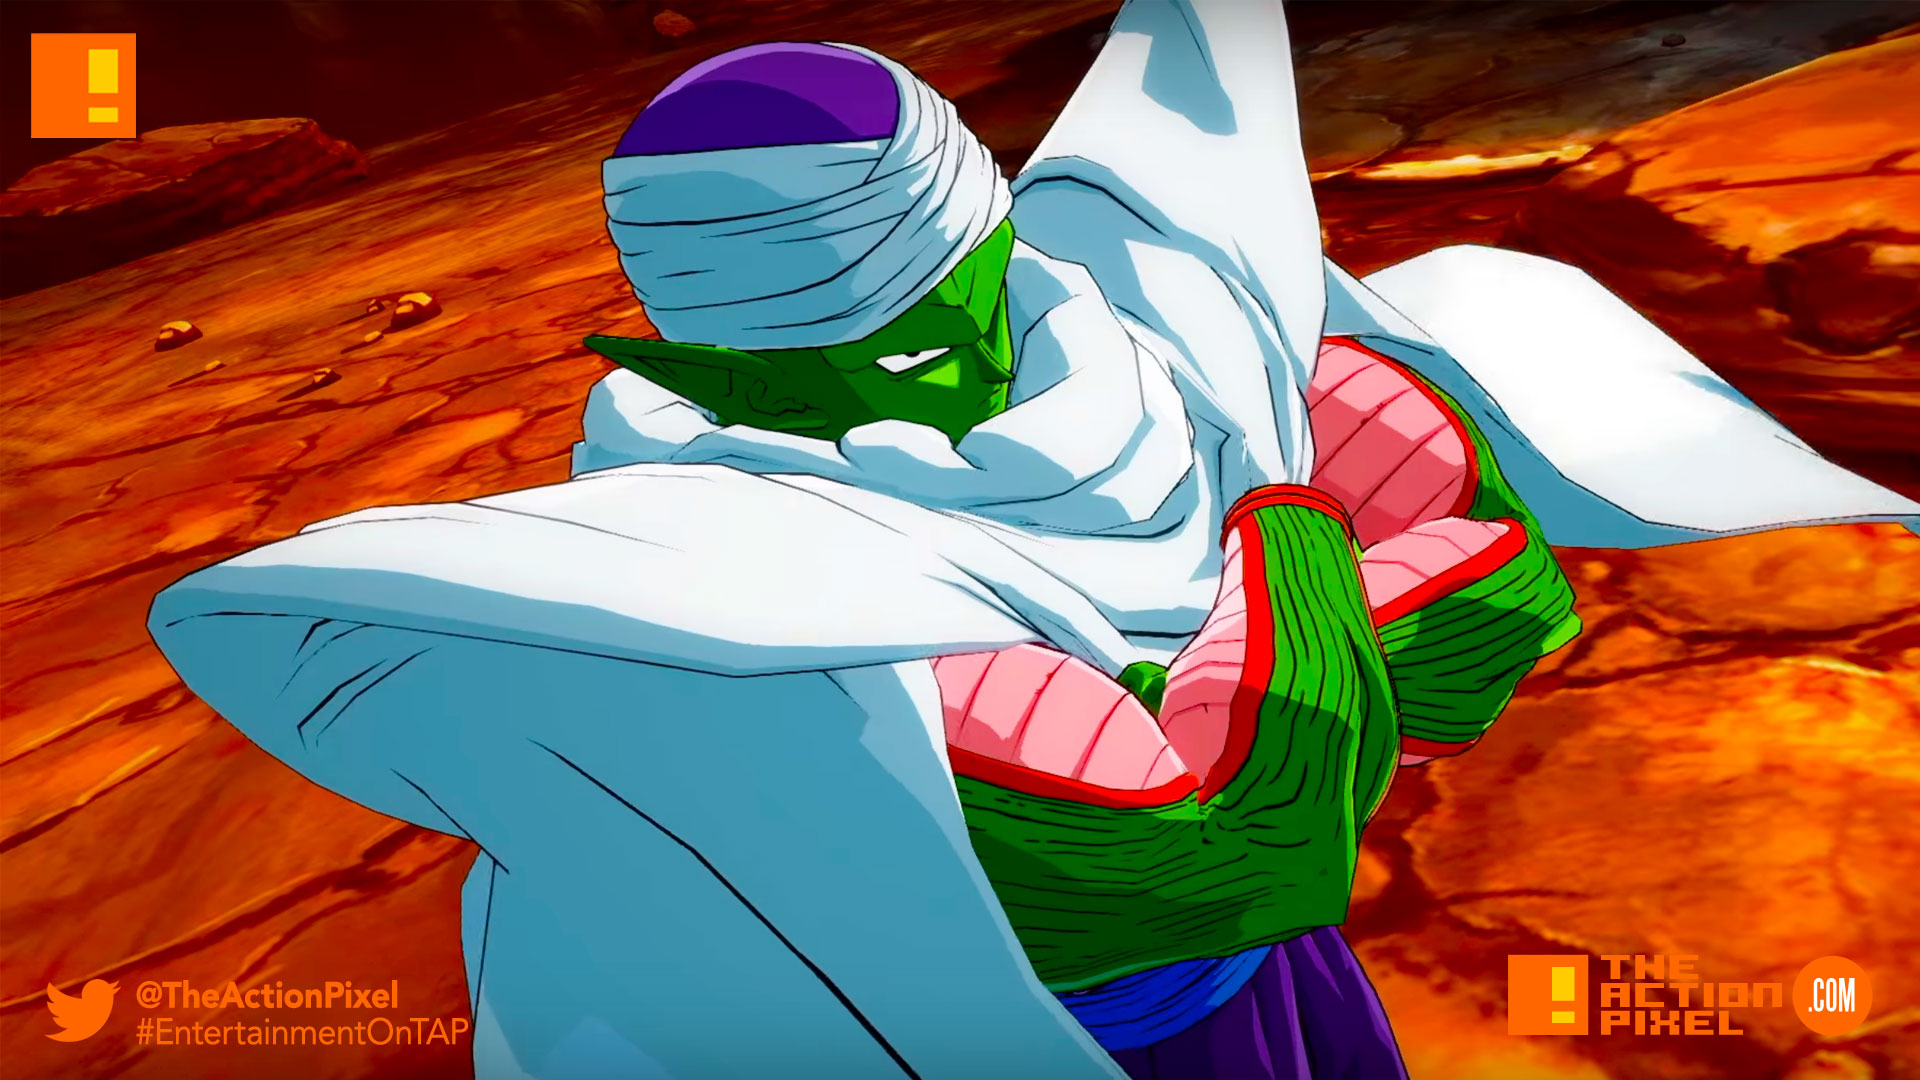 piccolo, dragon ball fighterz,dragon ball z, entertainment on tap, the action pixel